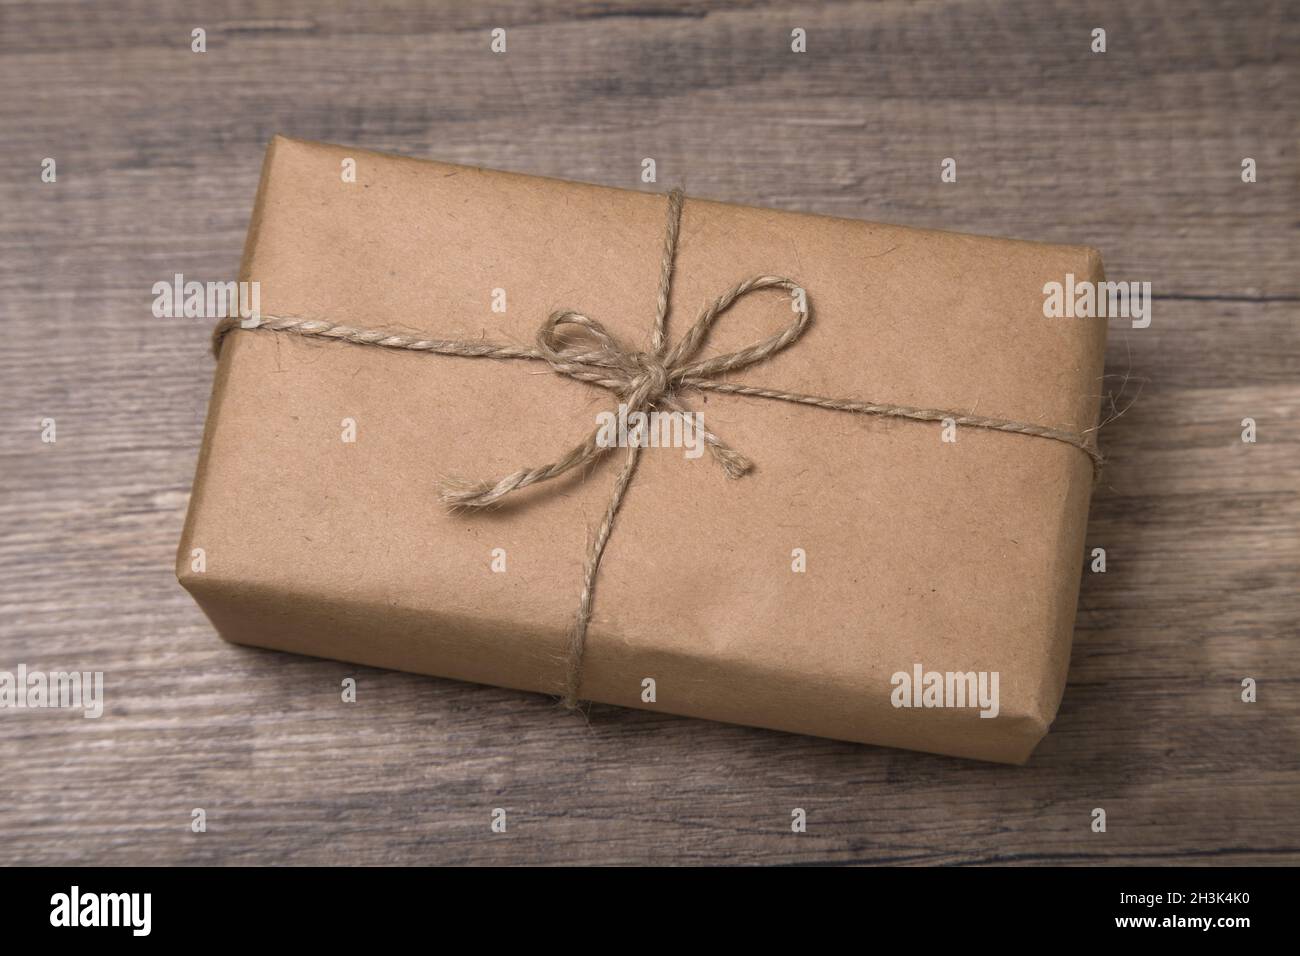 Christmas or New Year gift box wrapped in kraft paper with blank gift tag on old wooden background. Stock Photo